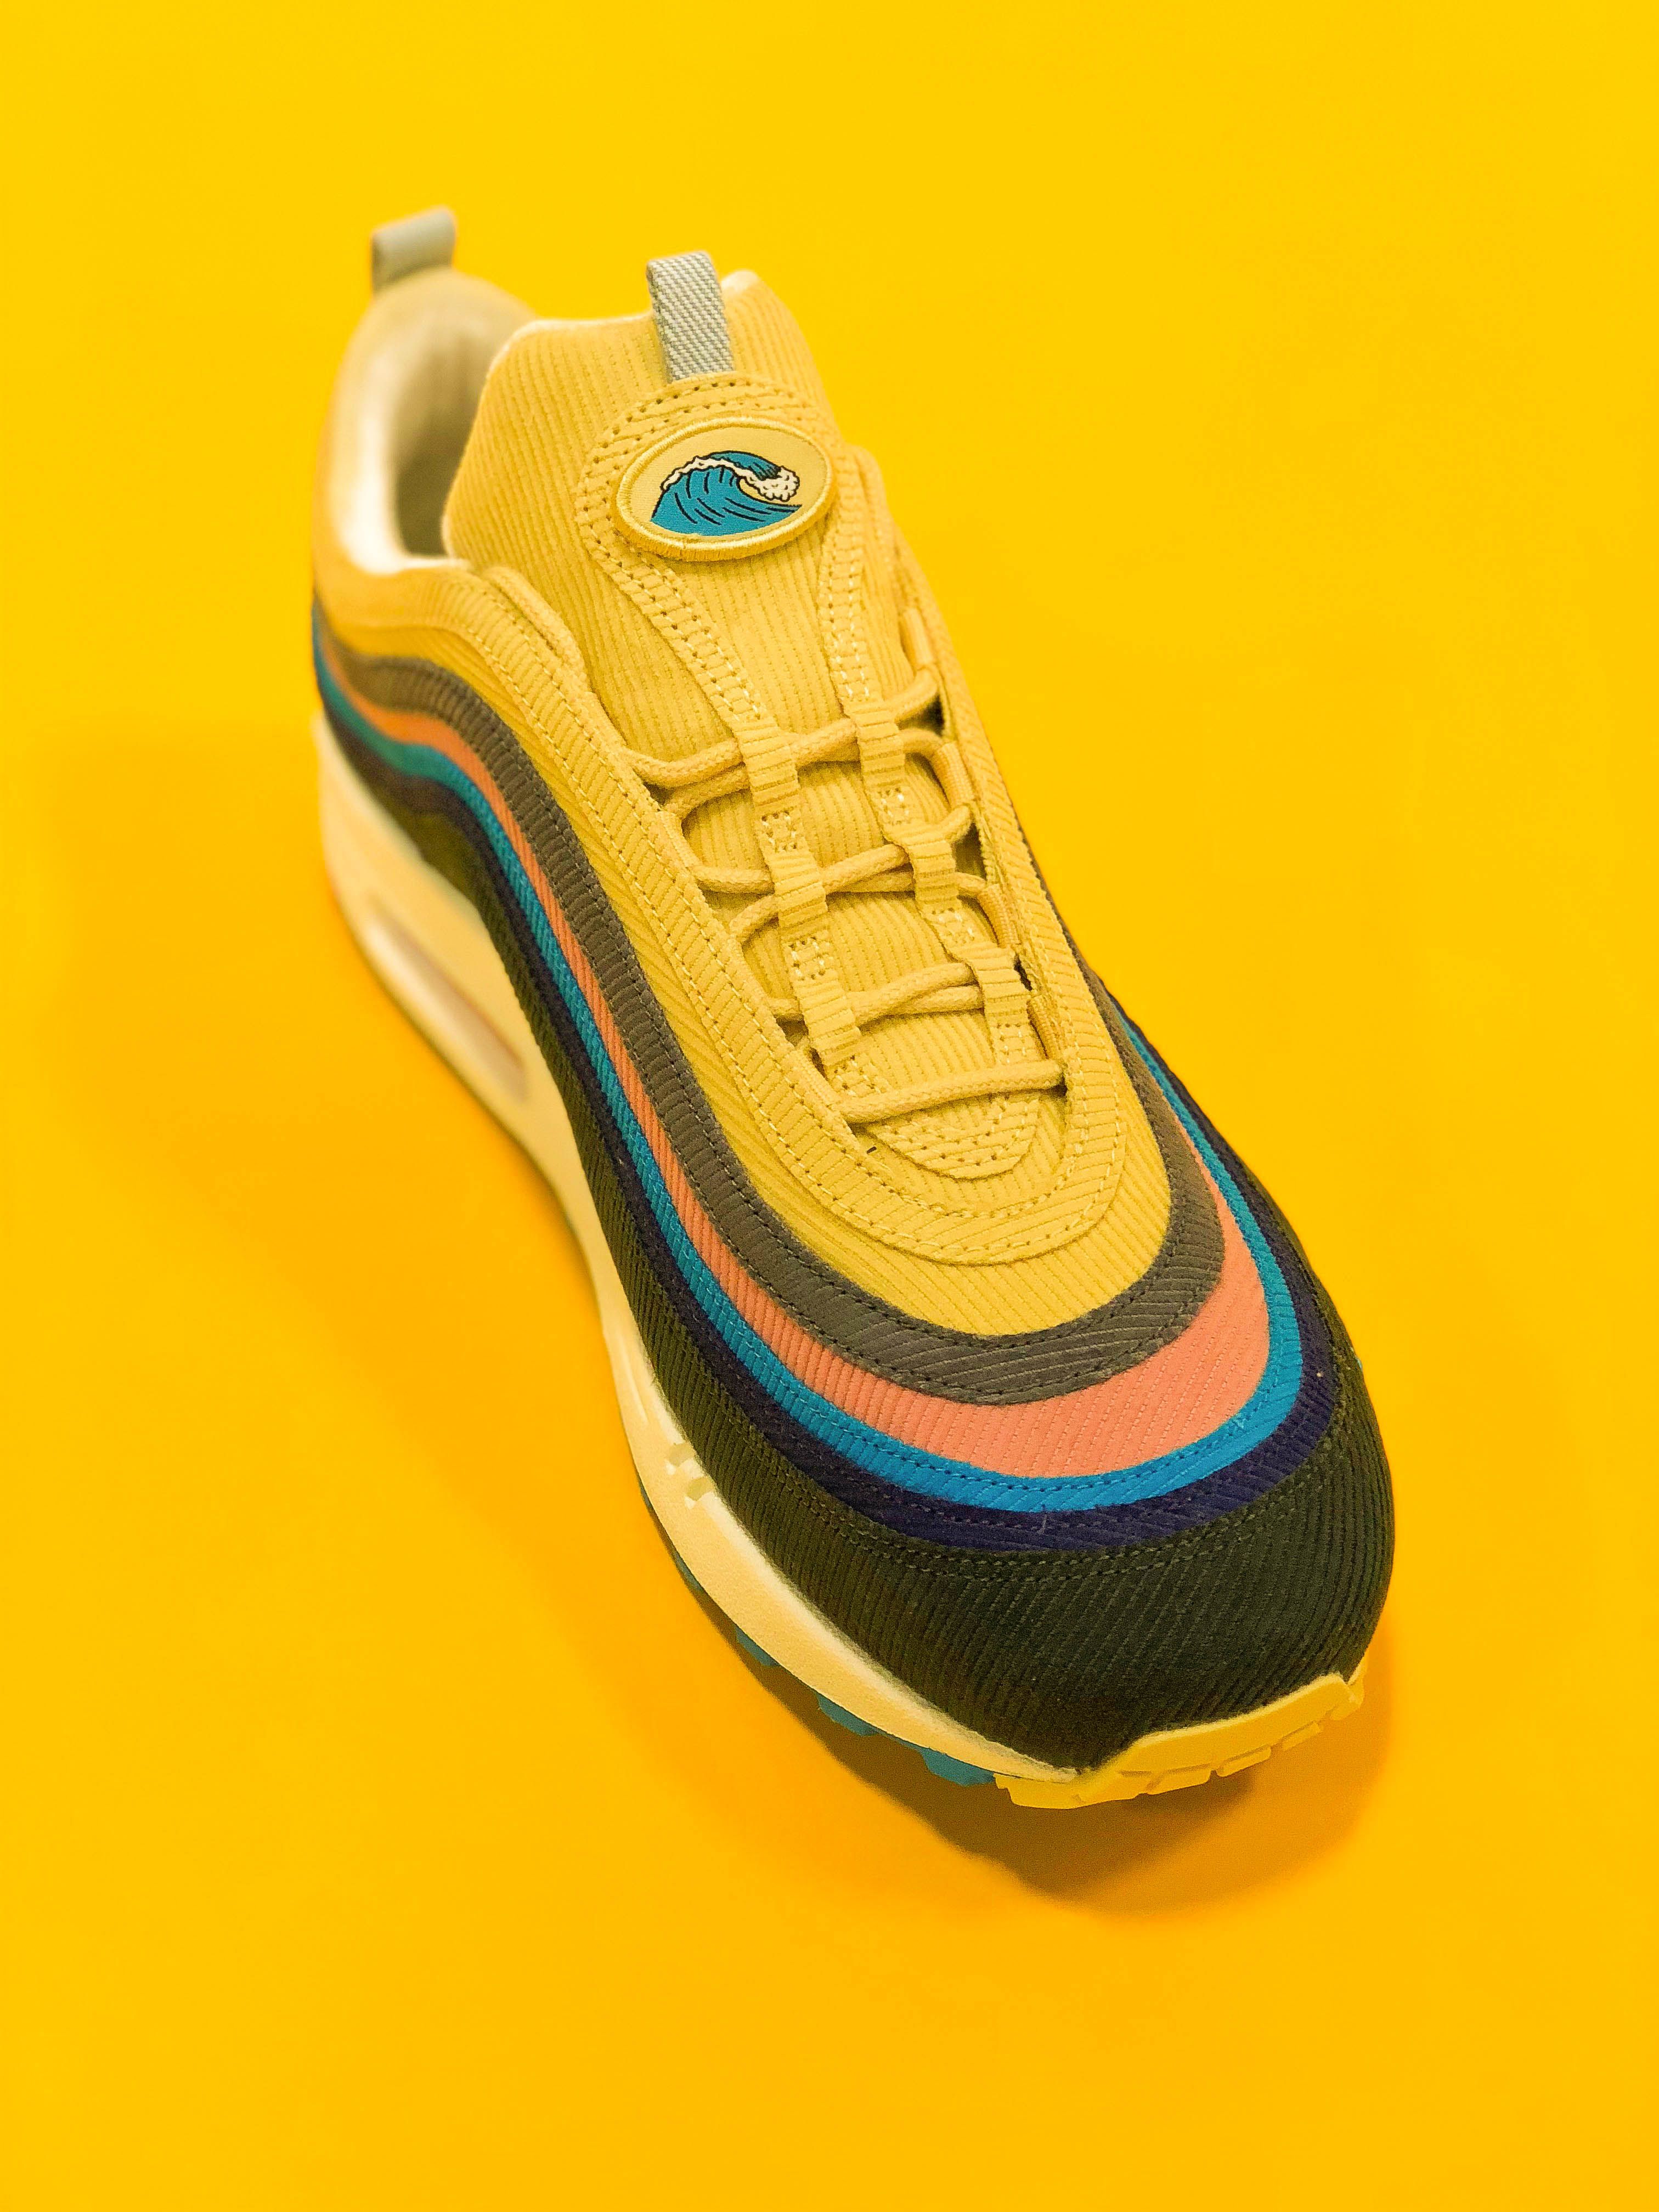 Celebrate Air Max Day With Nike AM 1/97 Sean Wotherspoon Winner of 